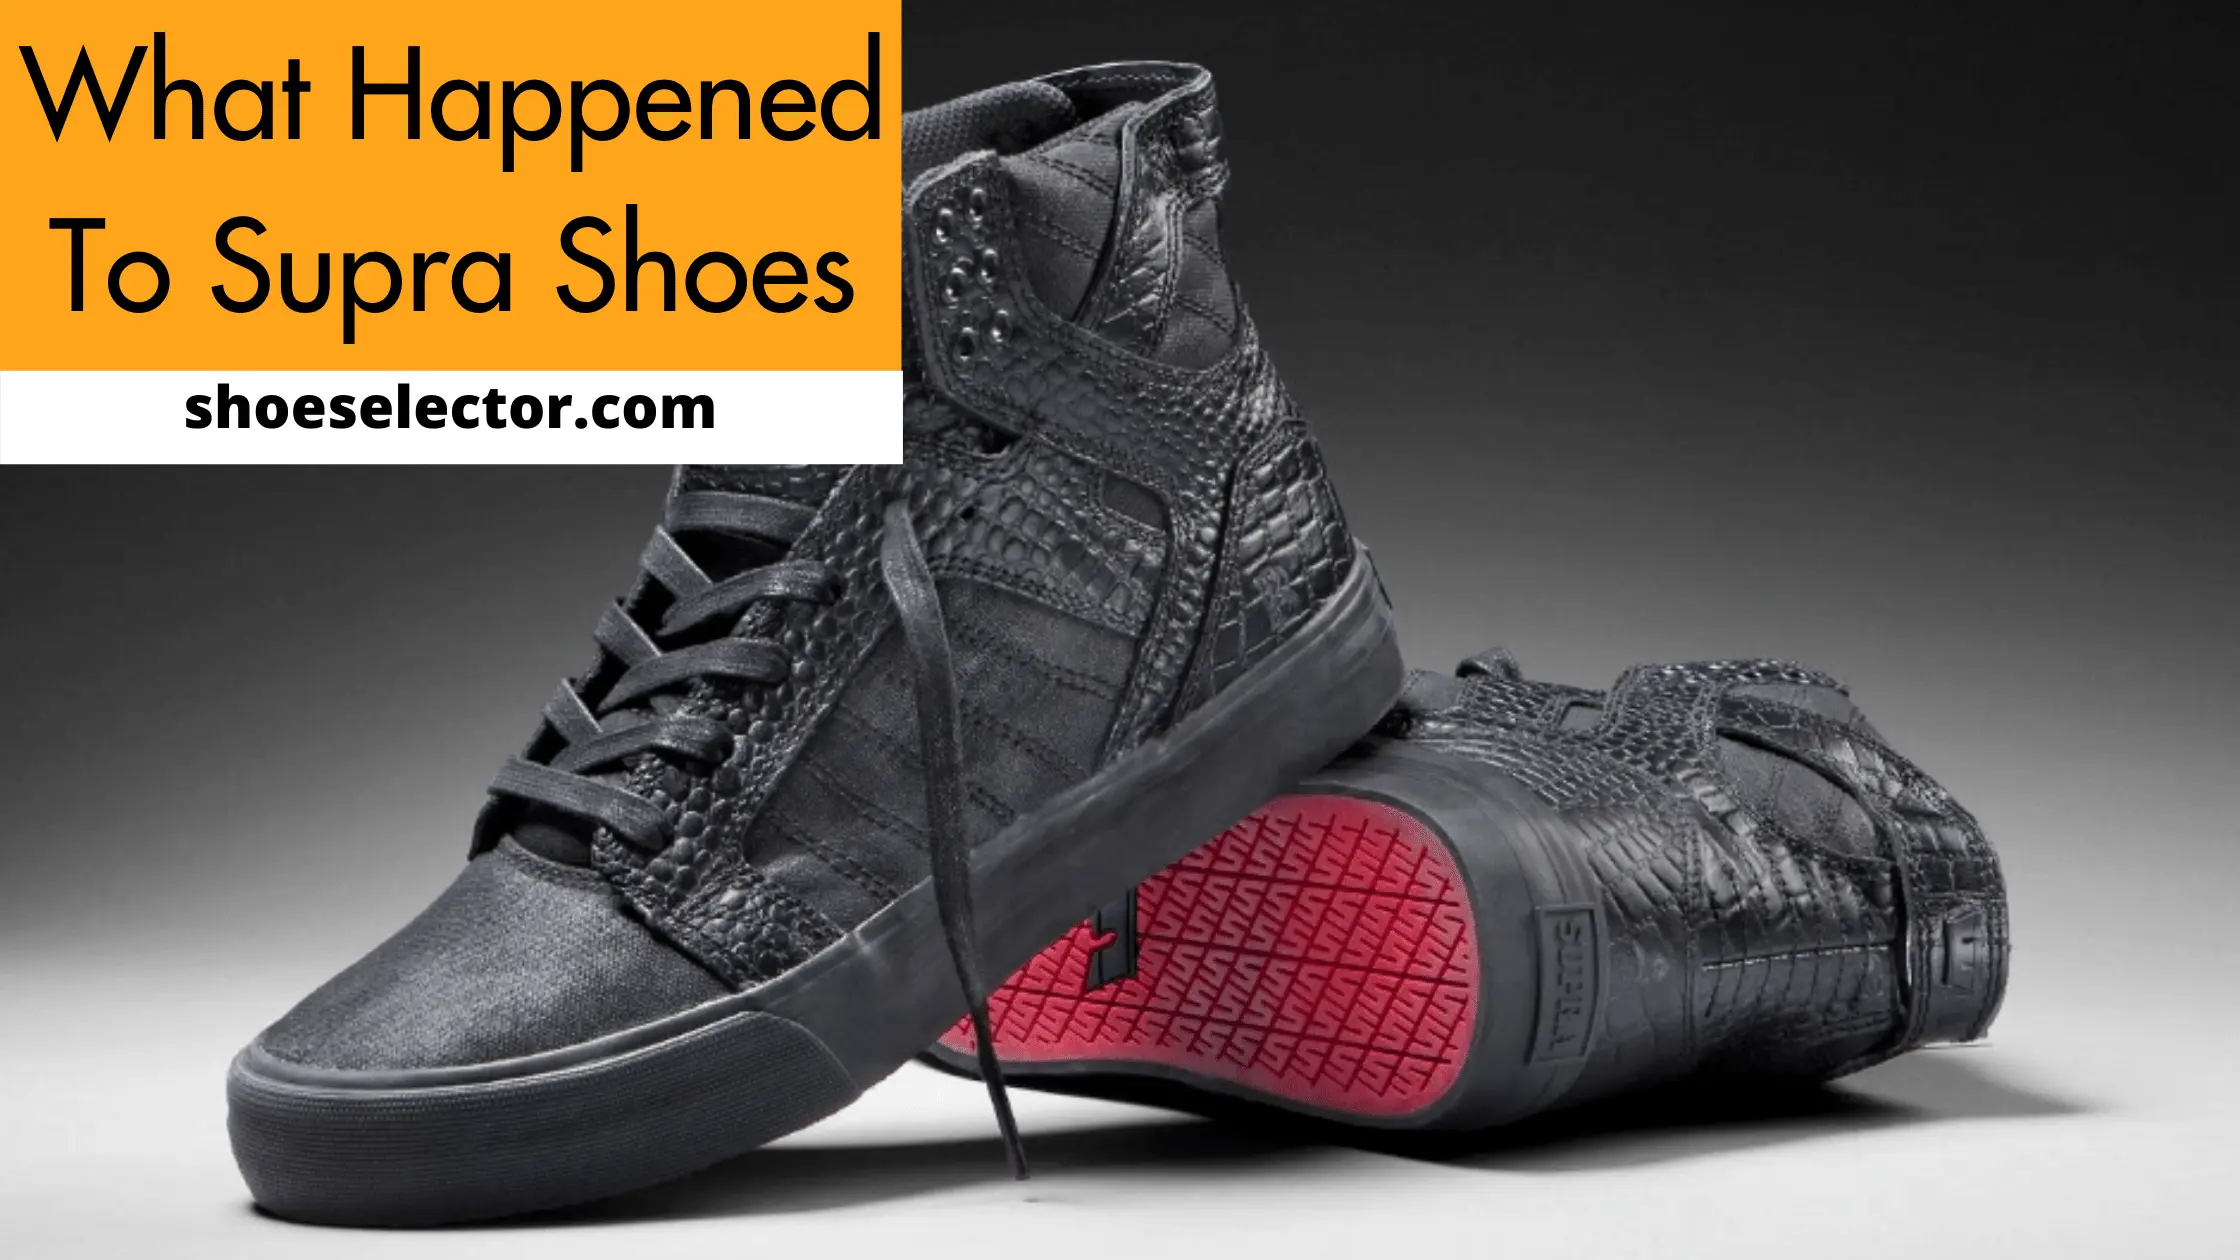 What Happened To Supra Shoes? All about Supra Shoes